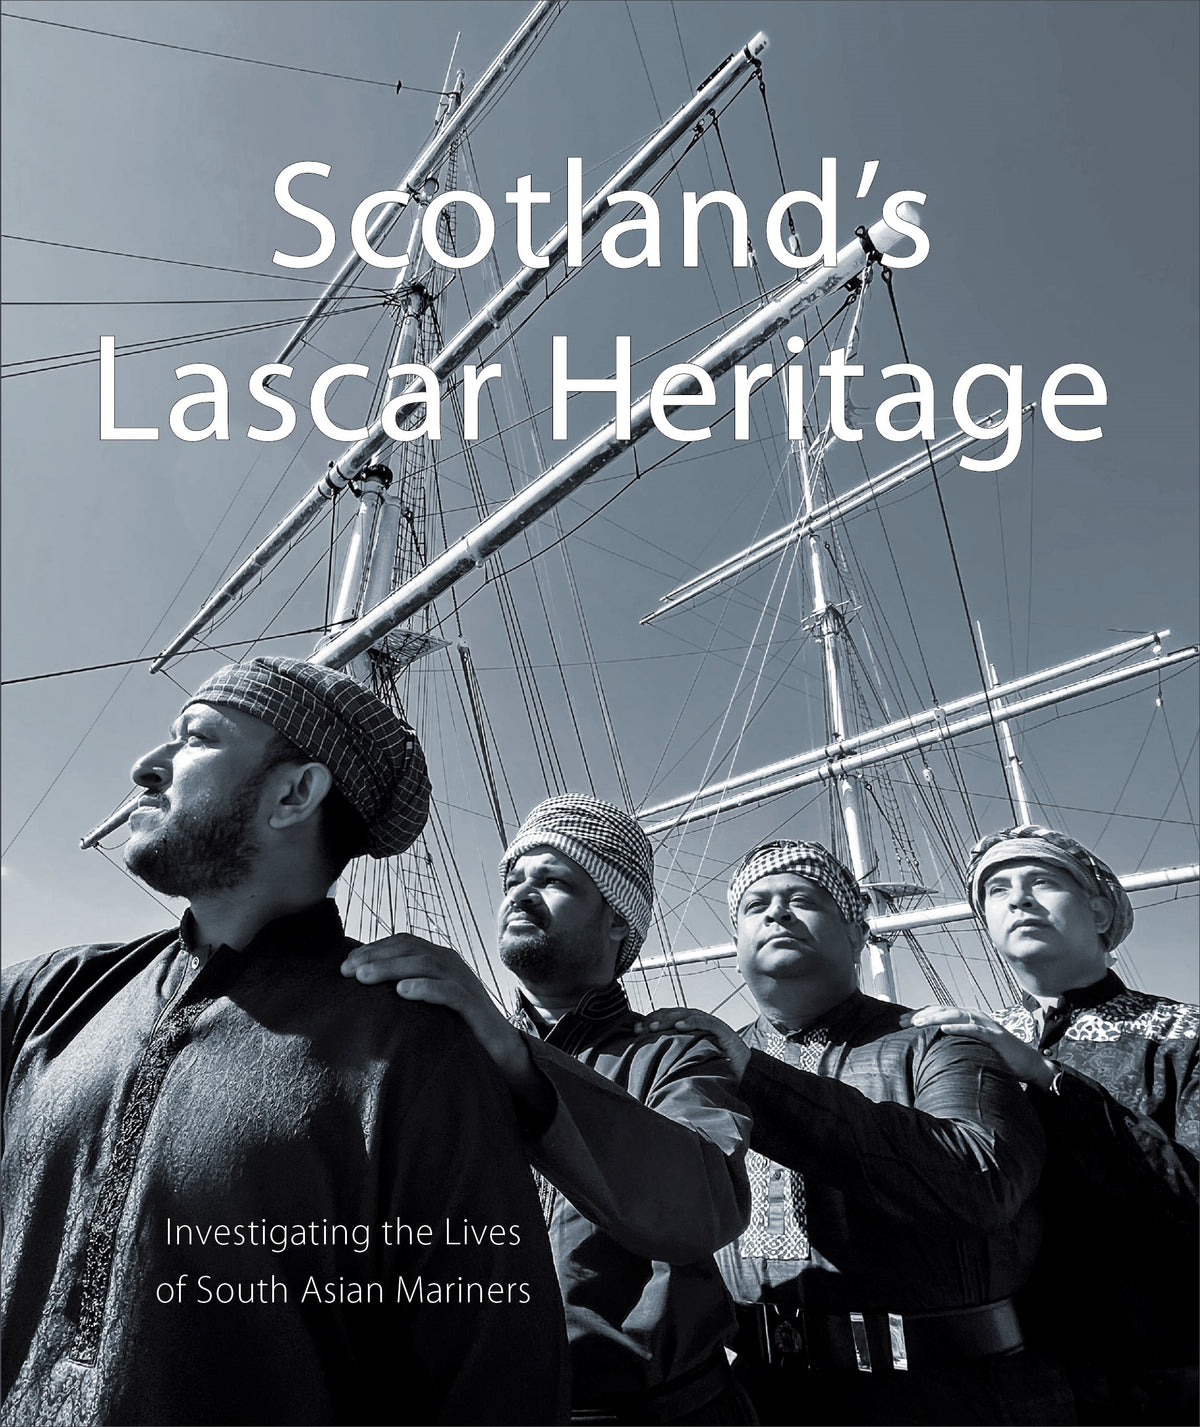 Scotland’s Lascar Heritage: Investigating the Lives of South Asian Mariners